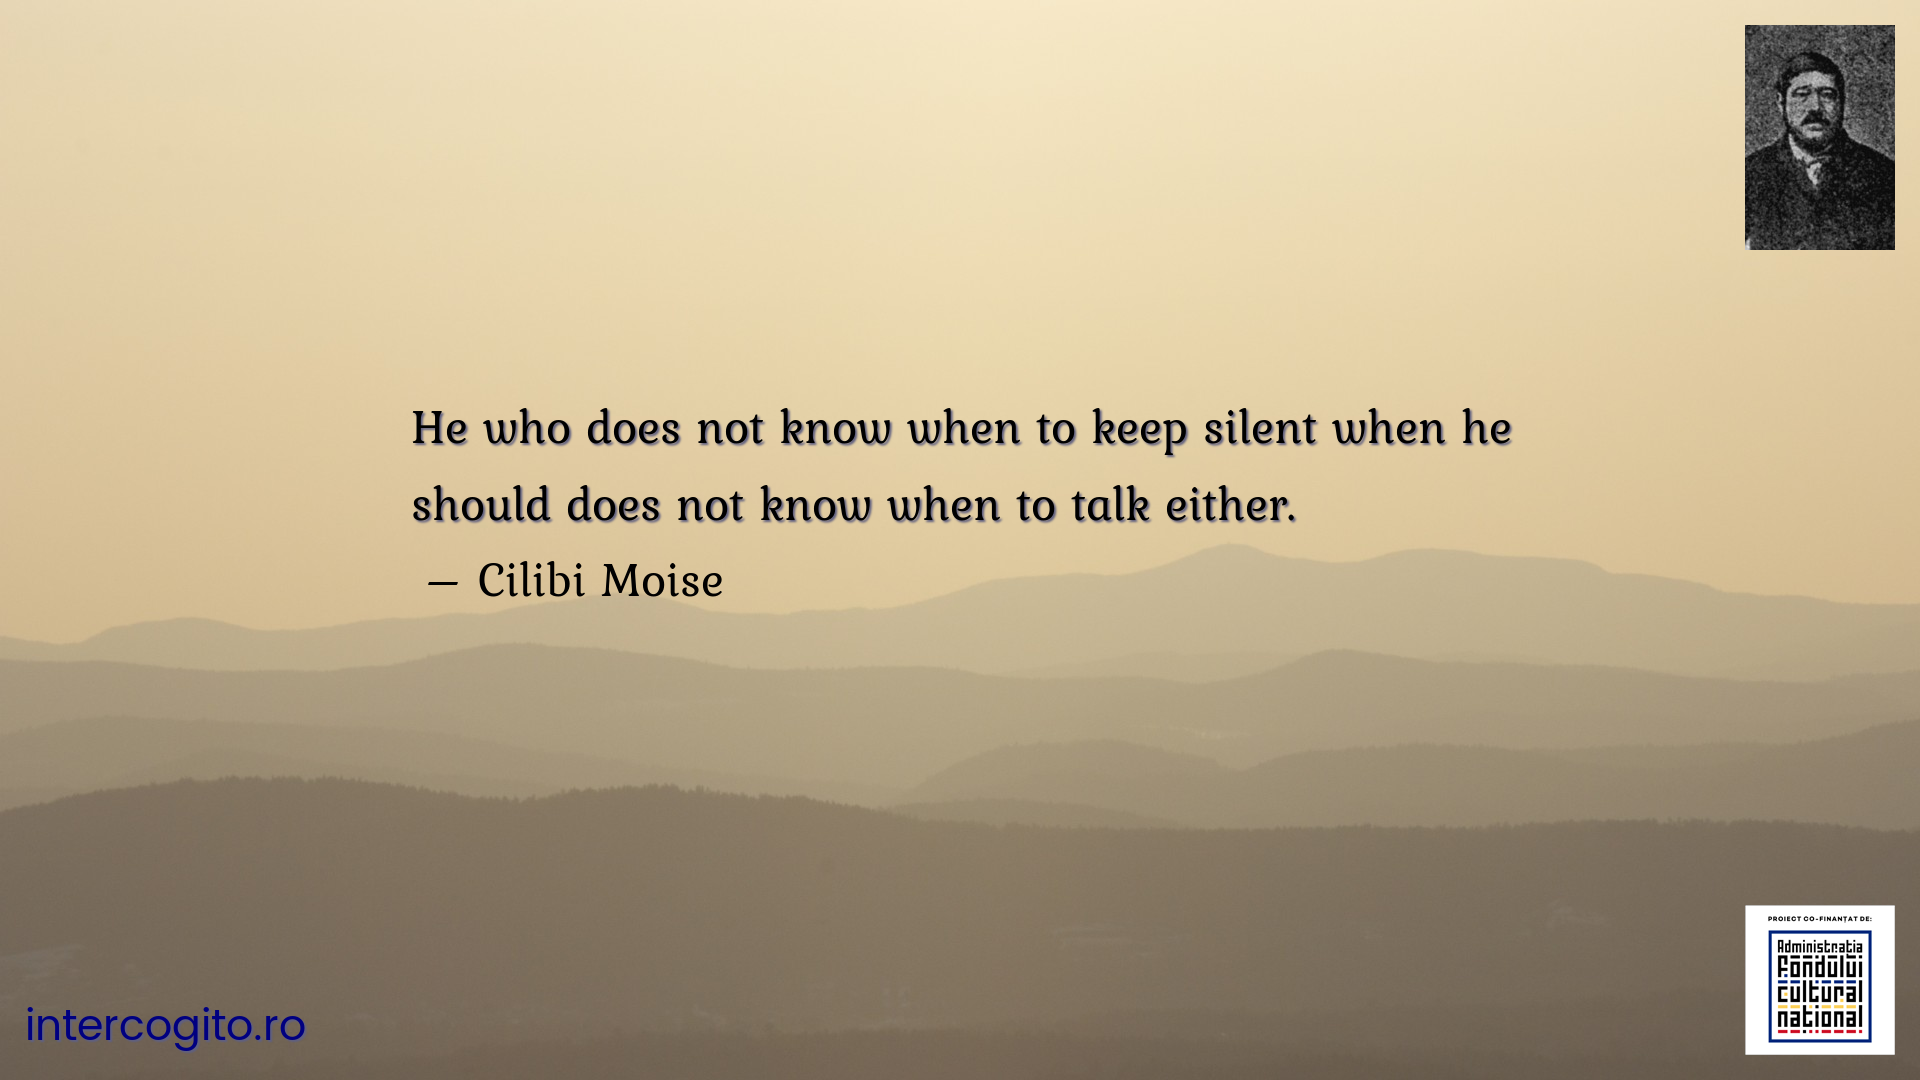 He who does not know when to keep silent when he should does not know when to talk either.